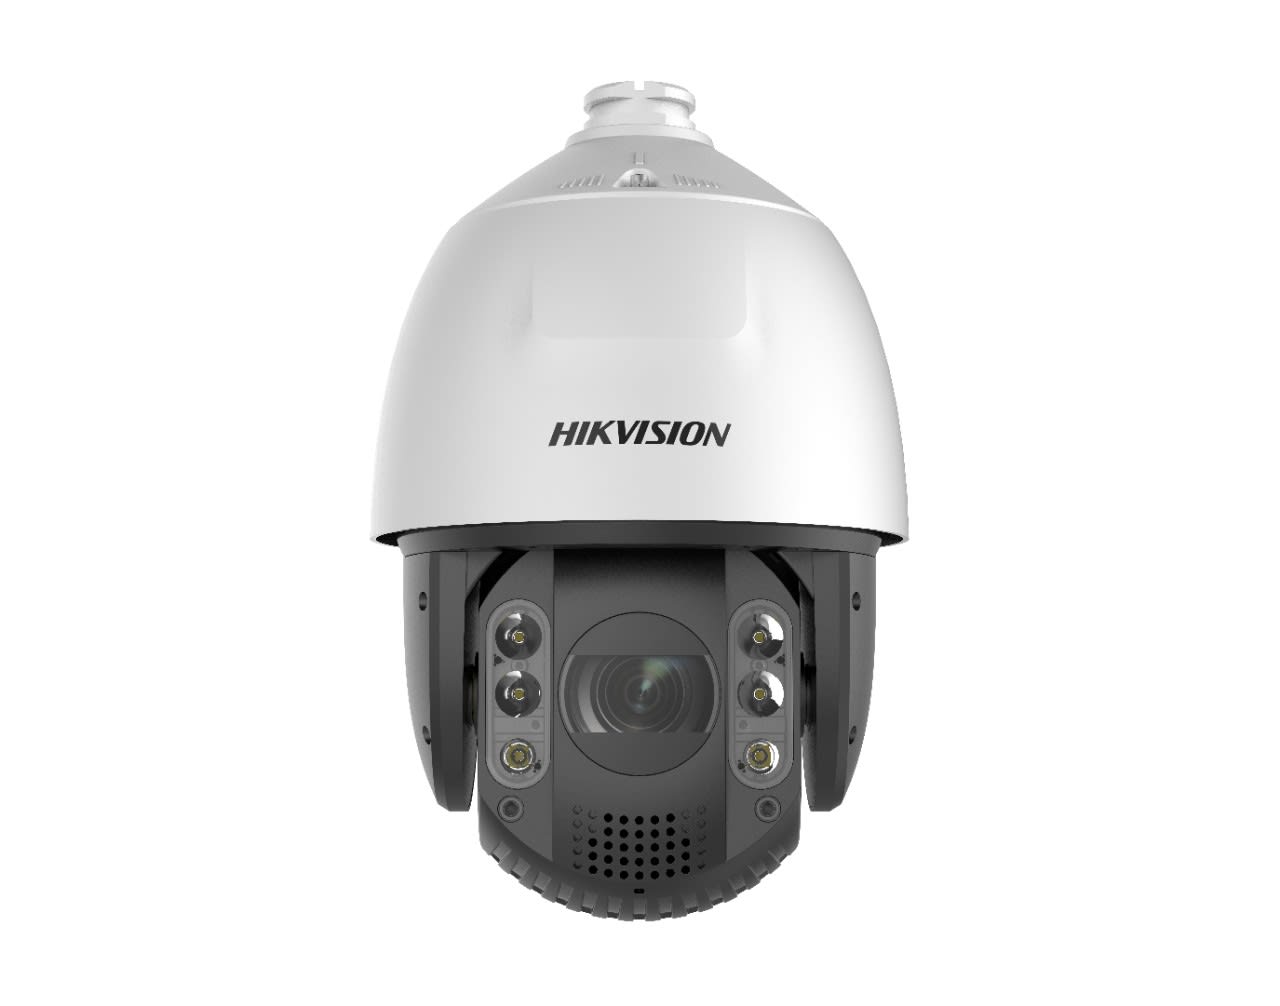 Hikvision - Camera IP Dome 2MP VF 4.8 mm to 153 mm, IP66, IK10, WDR 120dB, IR 200m